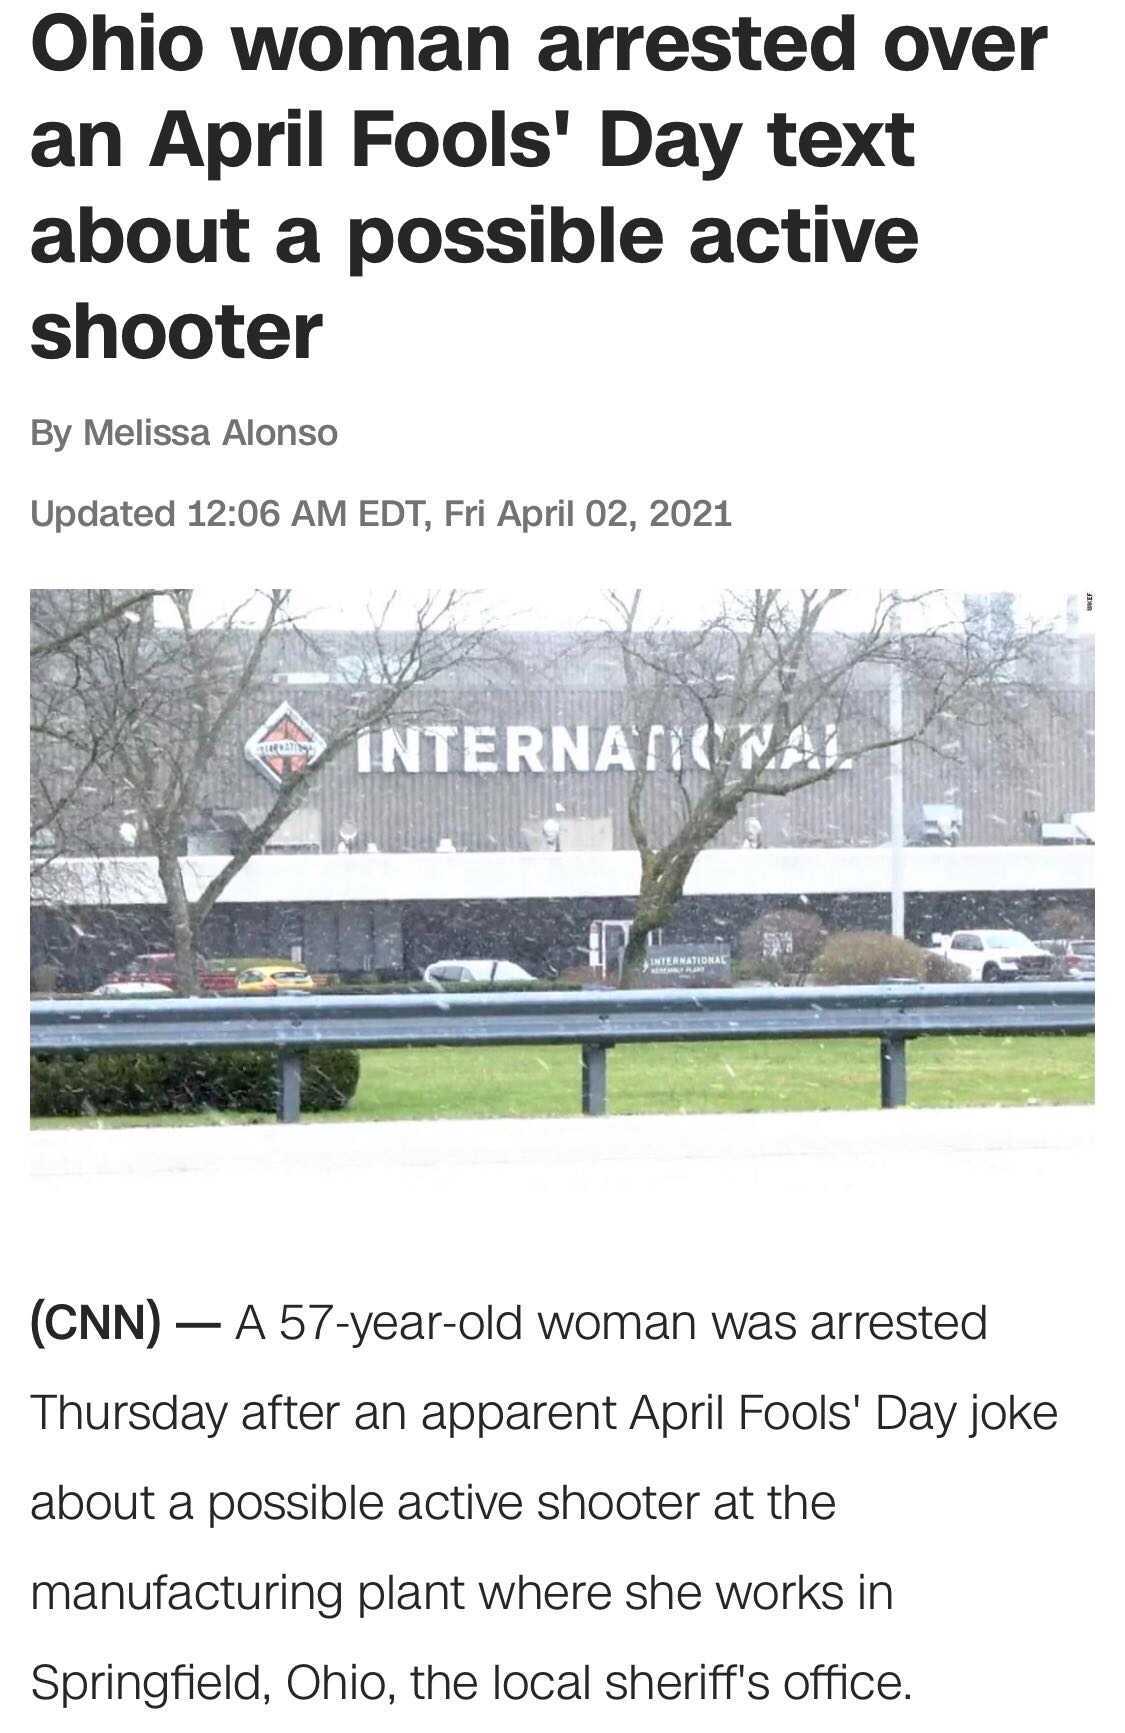 tree - Ohio woman arrested over an April Fools' Day text about a possible active shooter By Melissa Alonso Updated Edt, Fri Date International International Cnn A 57yearold woman was arrested Thursday after an apparent April Fools' Day joke about a possib